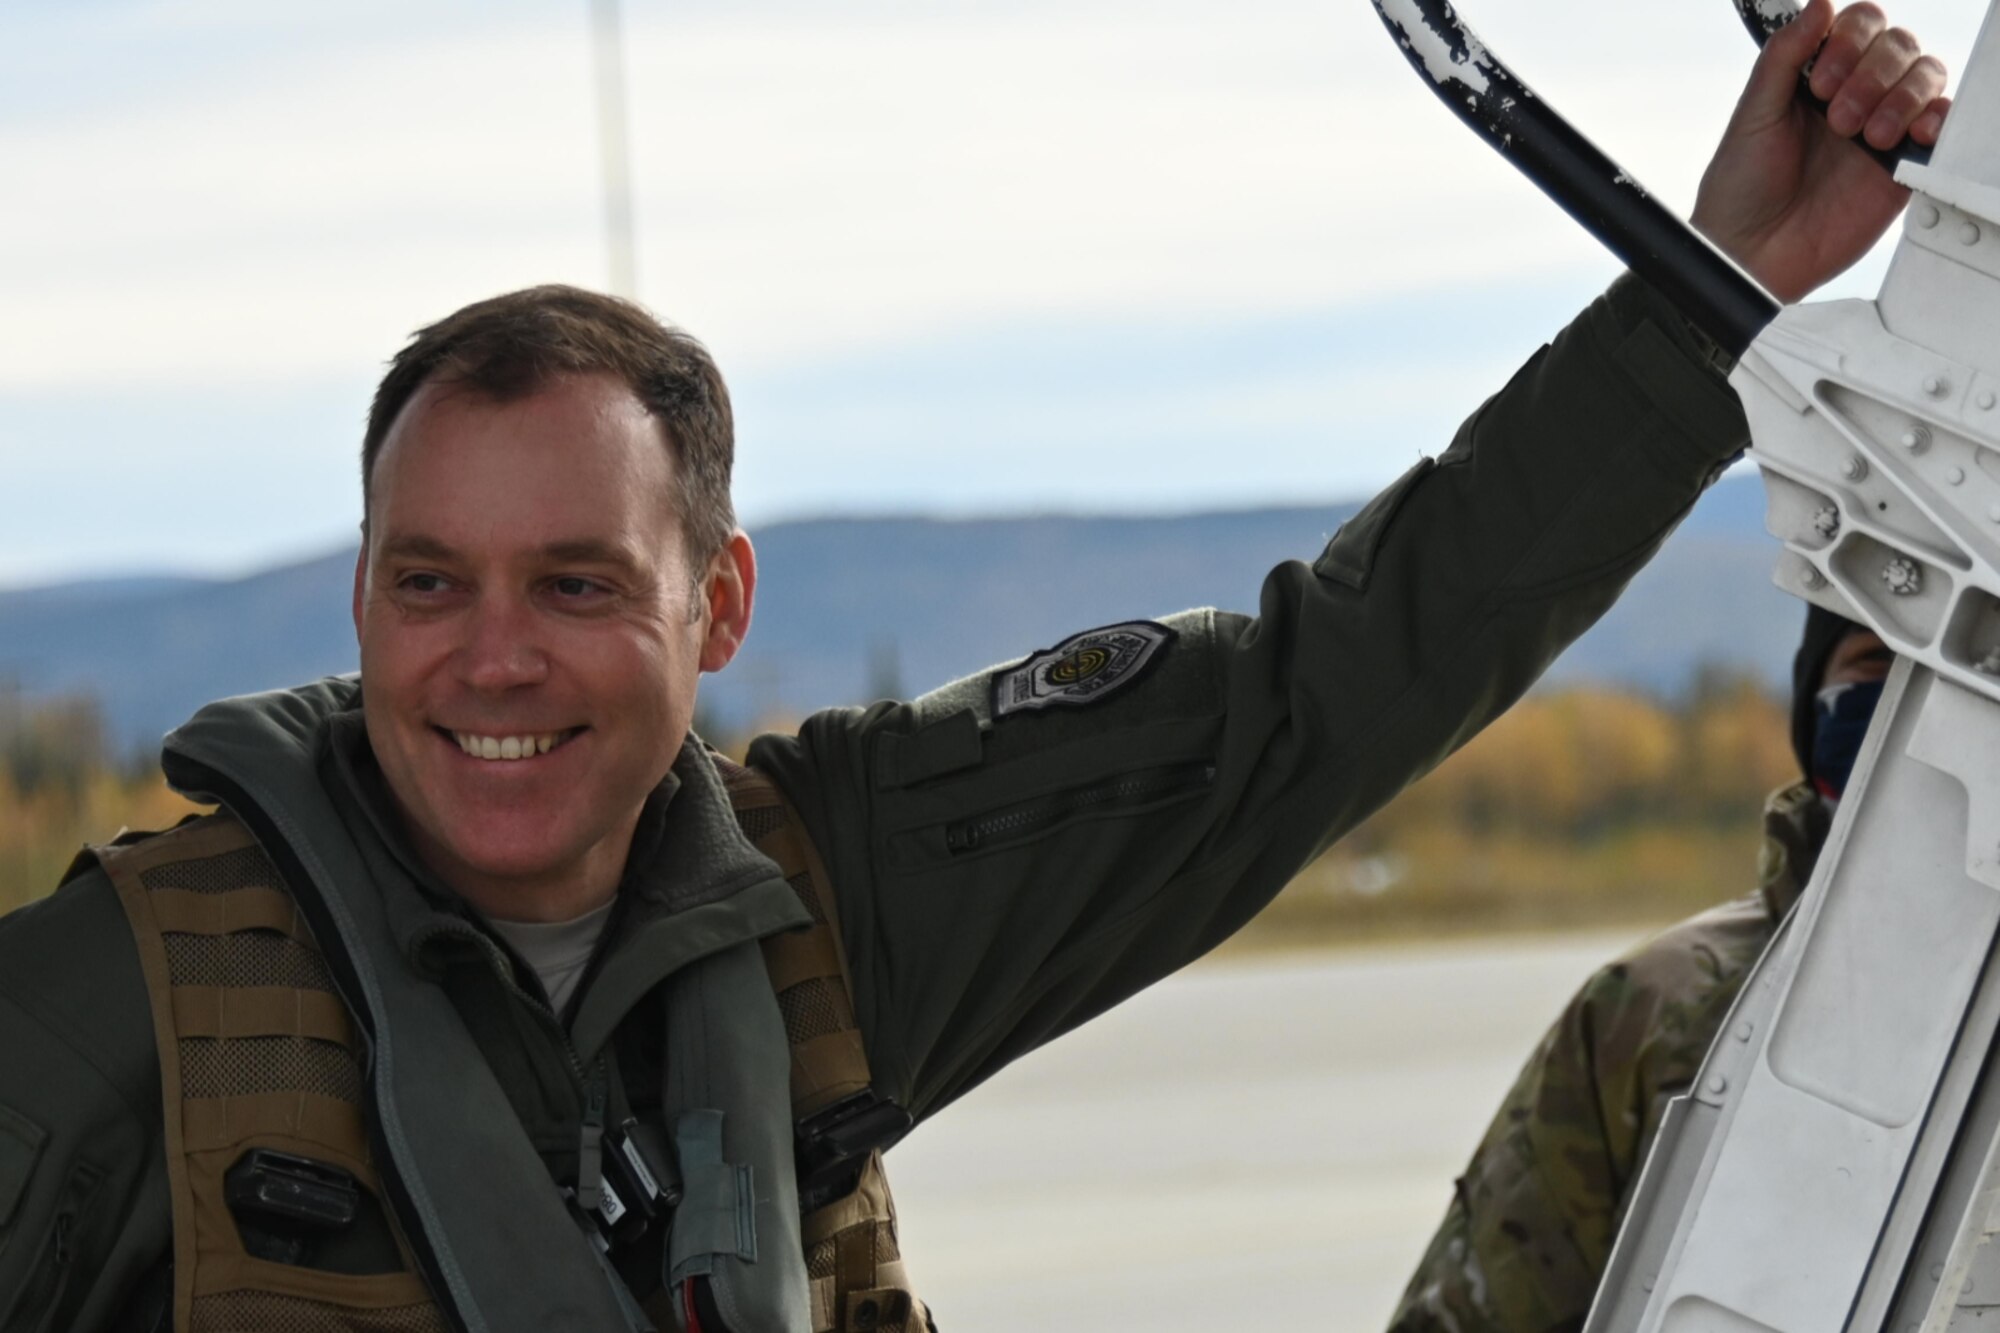 An Airman smiles as he boards a B-1 Lancer